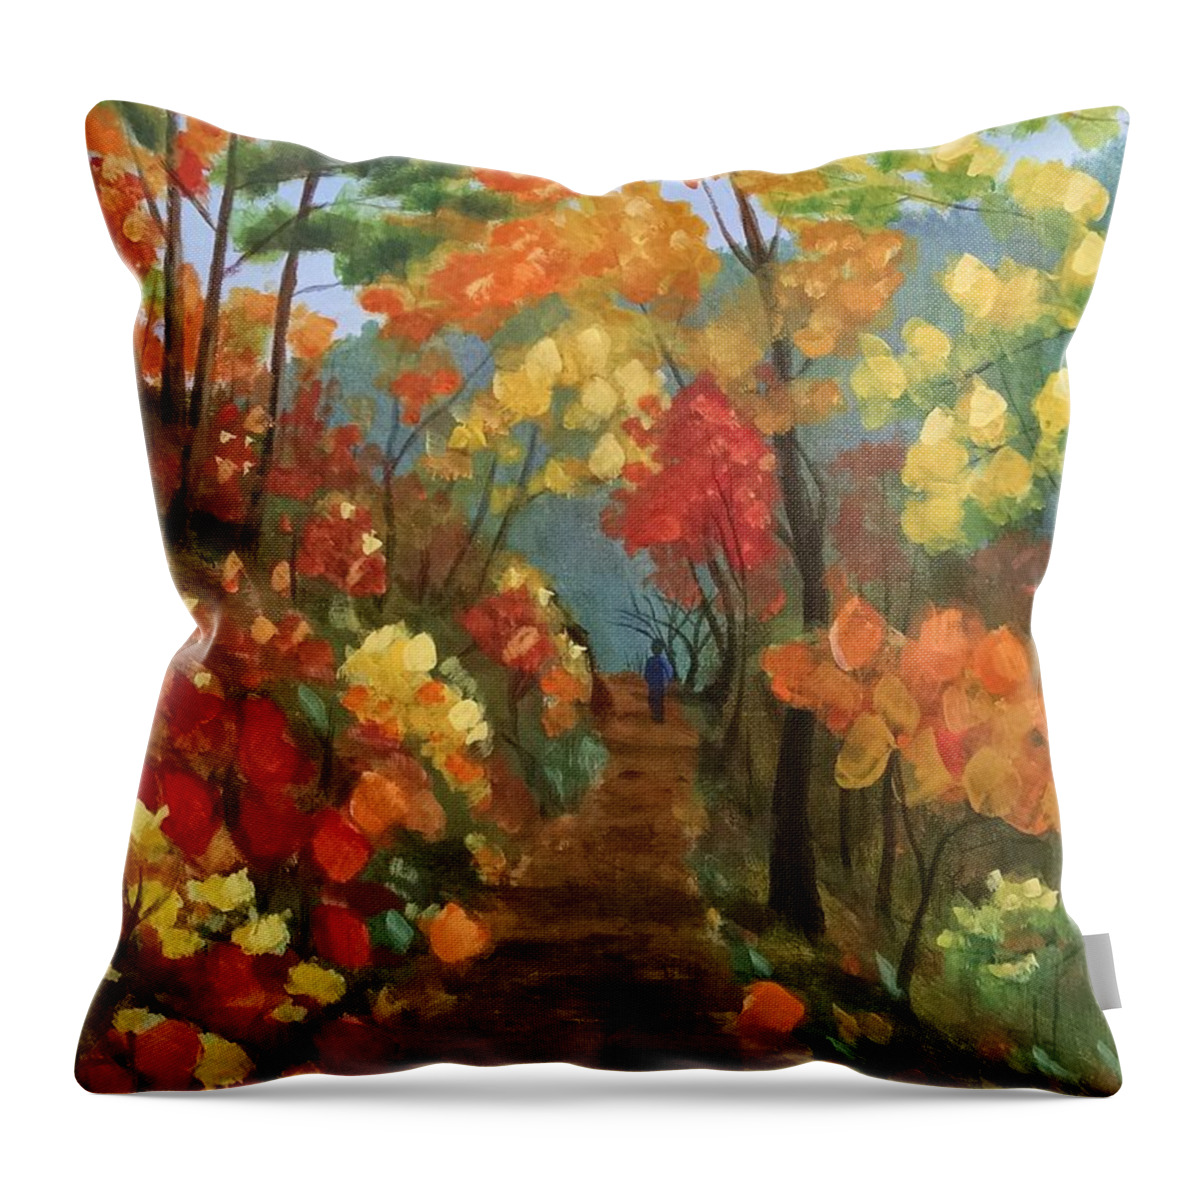 Autumn Throw Pillow featuring the painting An Autumn Boy by Helian Cornwell